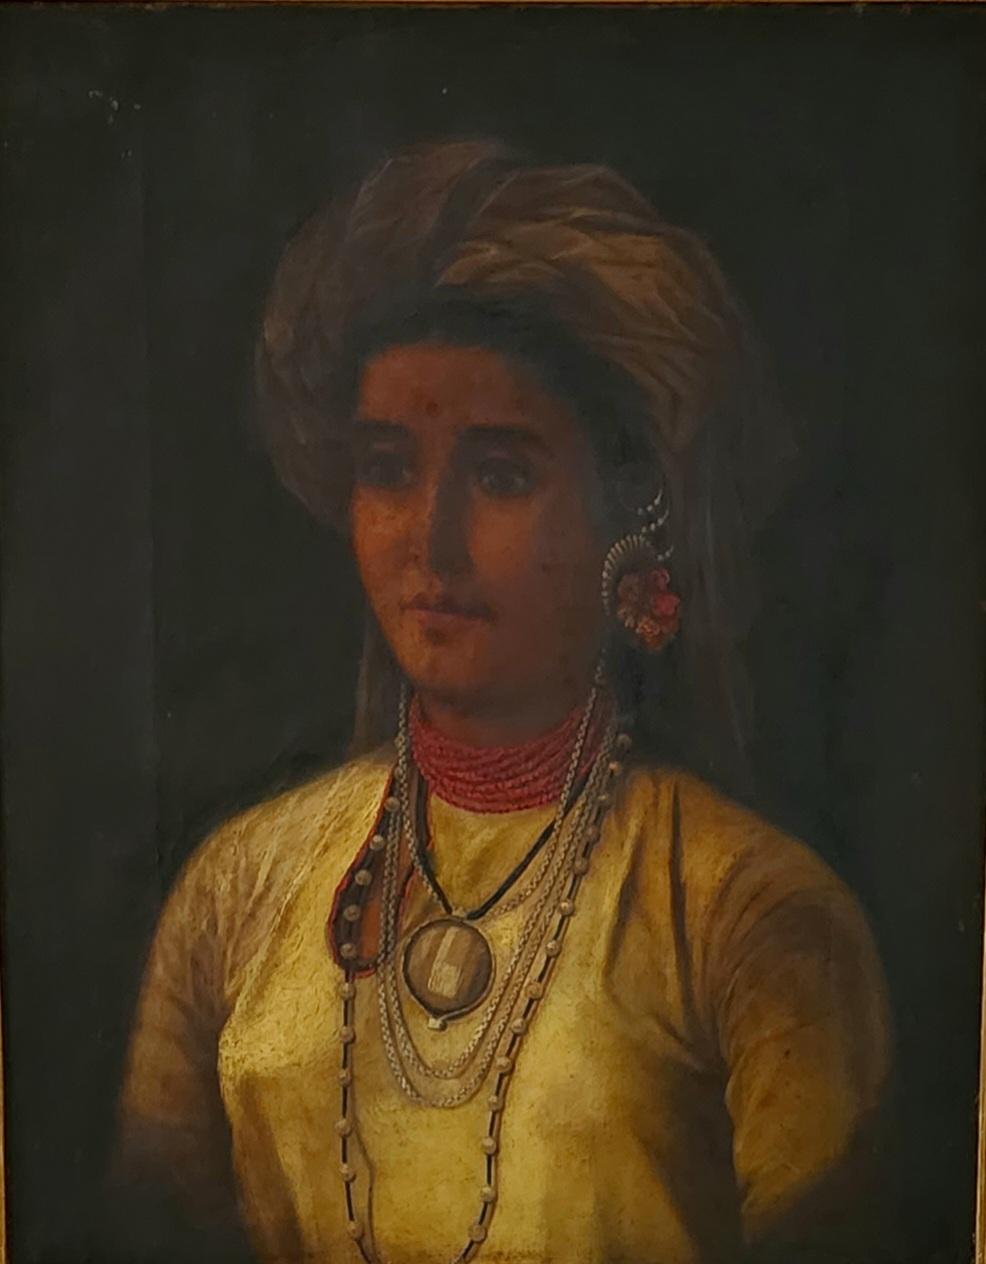 PORTRAIT OF AN INDIAN  NOBLE  WOMAN 19TH C , OIL ON CANVAS, RESTORED, FRAMED - Painting by 19th Century Orientalist School 